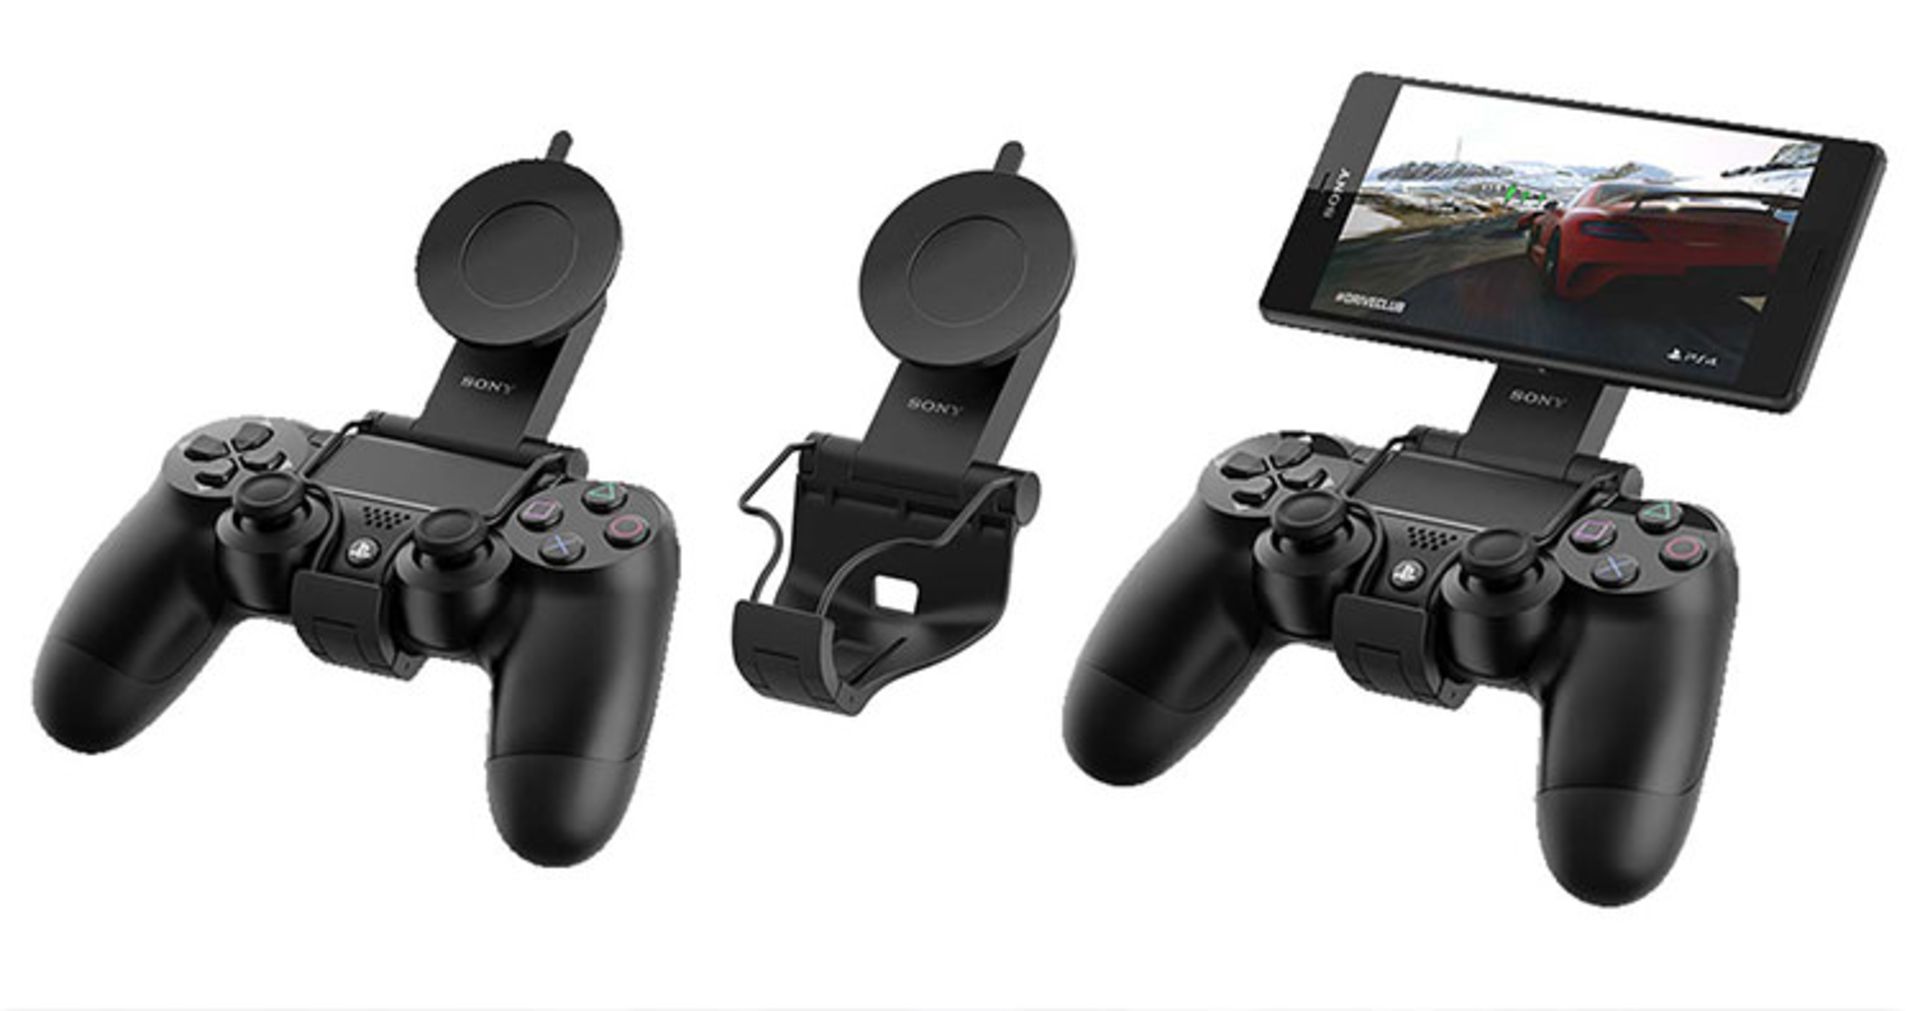 Dualshock 4 Controller with Xperia Z3